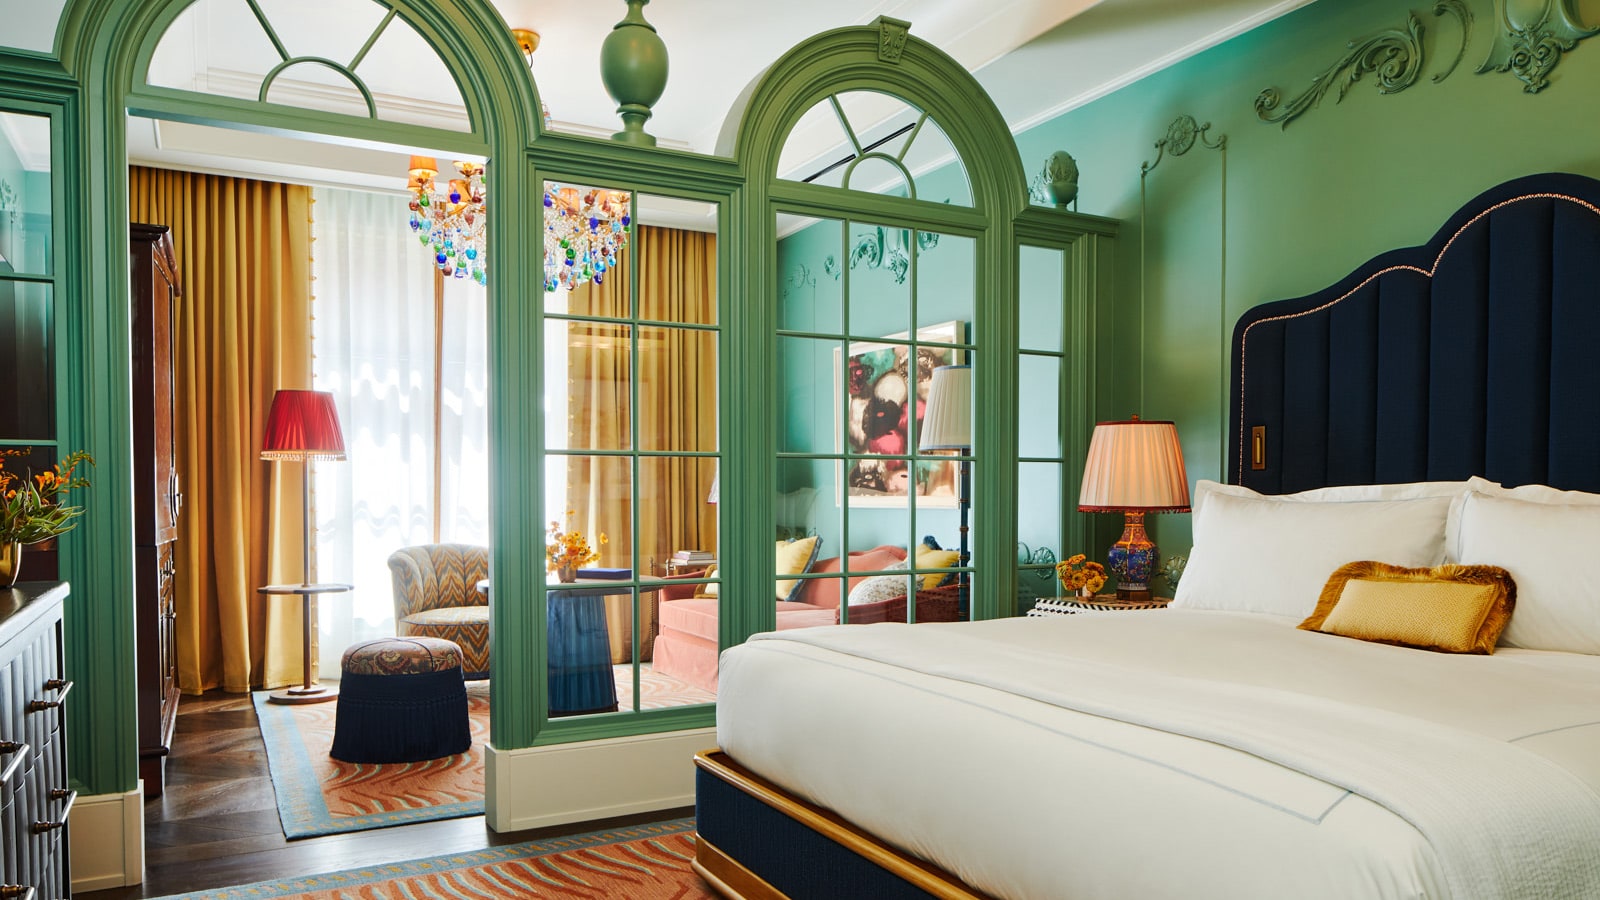 Mas d’en Bruno, Son Net, and The Fifth Avenue Hotel Named Among the World’s Best New Hotels